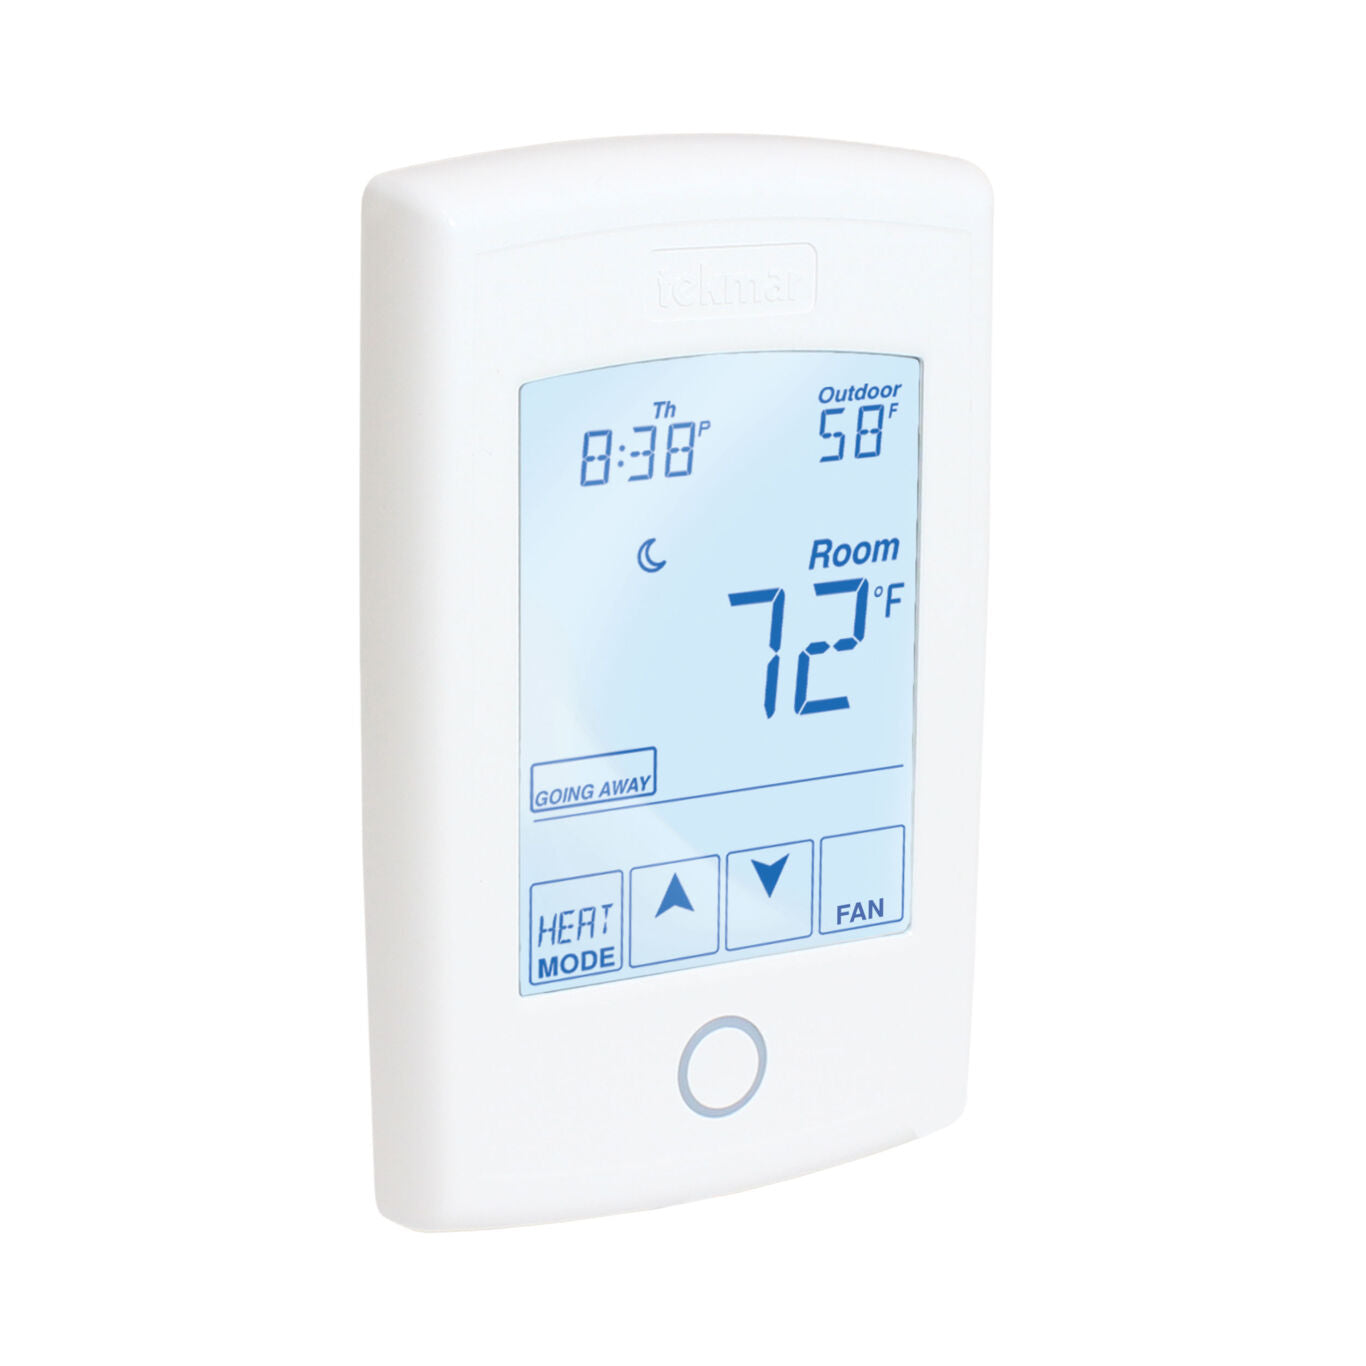 552 - Programmable tekmarNet Hydronic System Thermostat - One Stage Heat